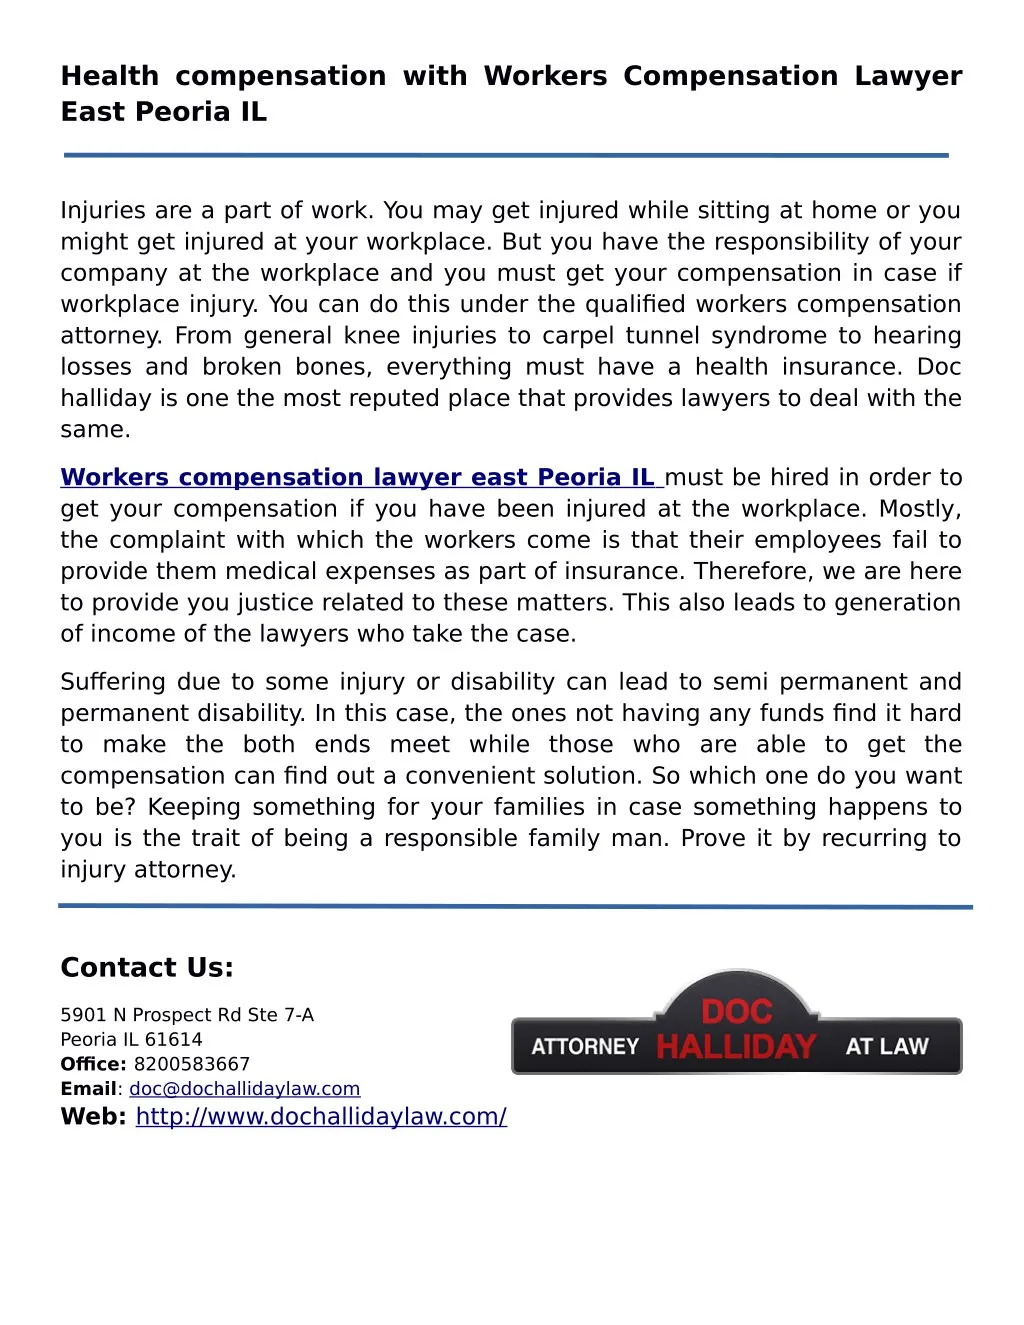 health compensation with workers compensation